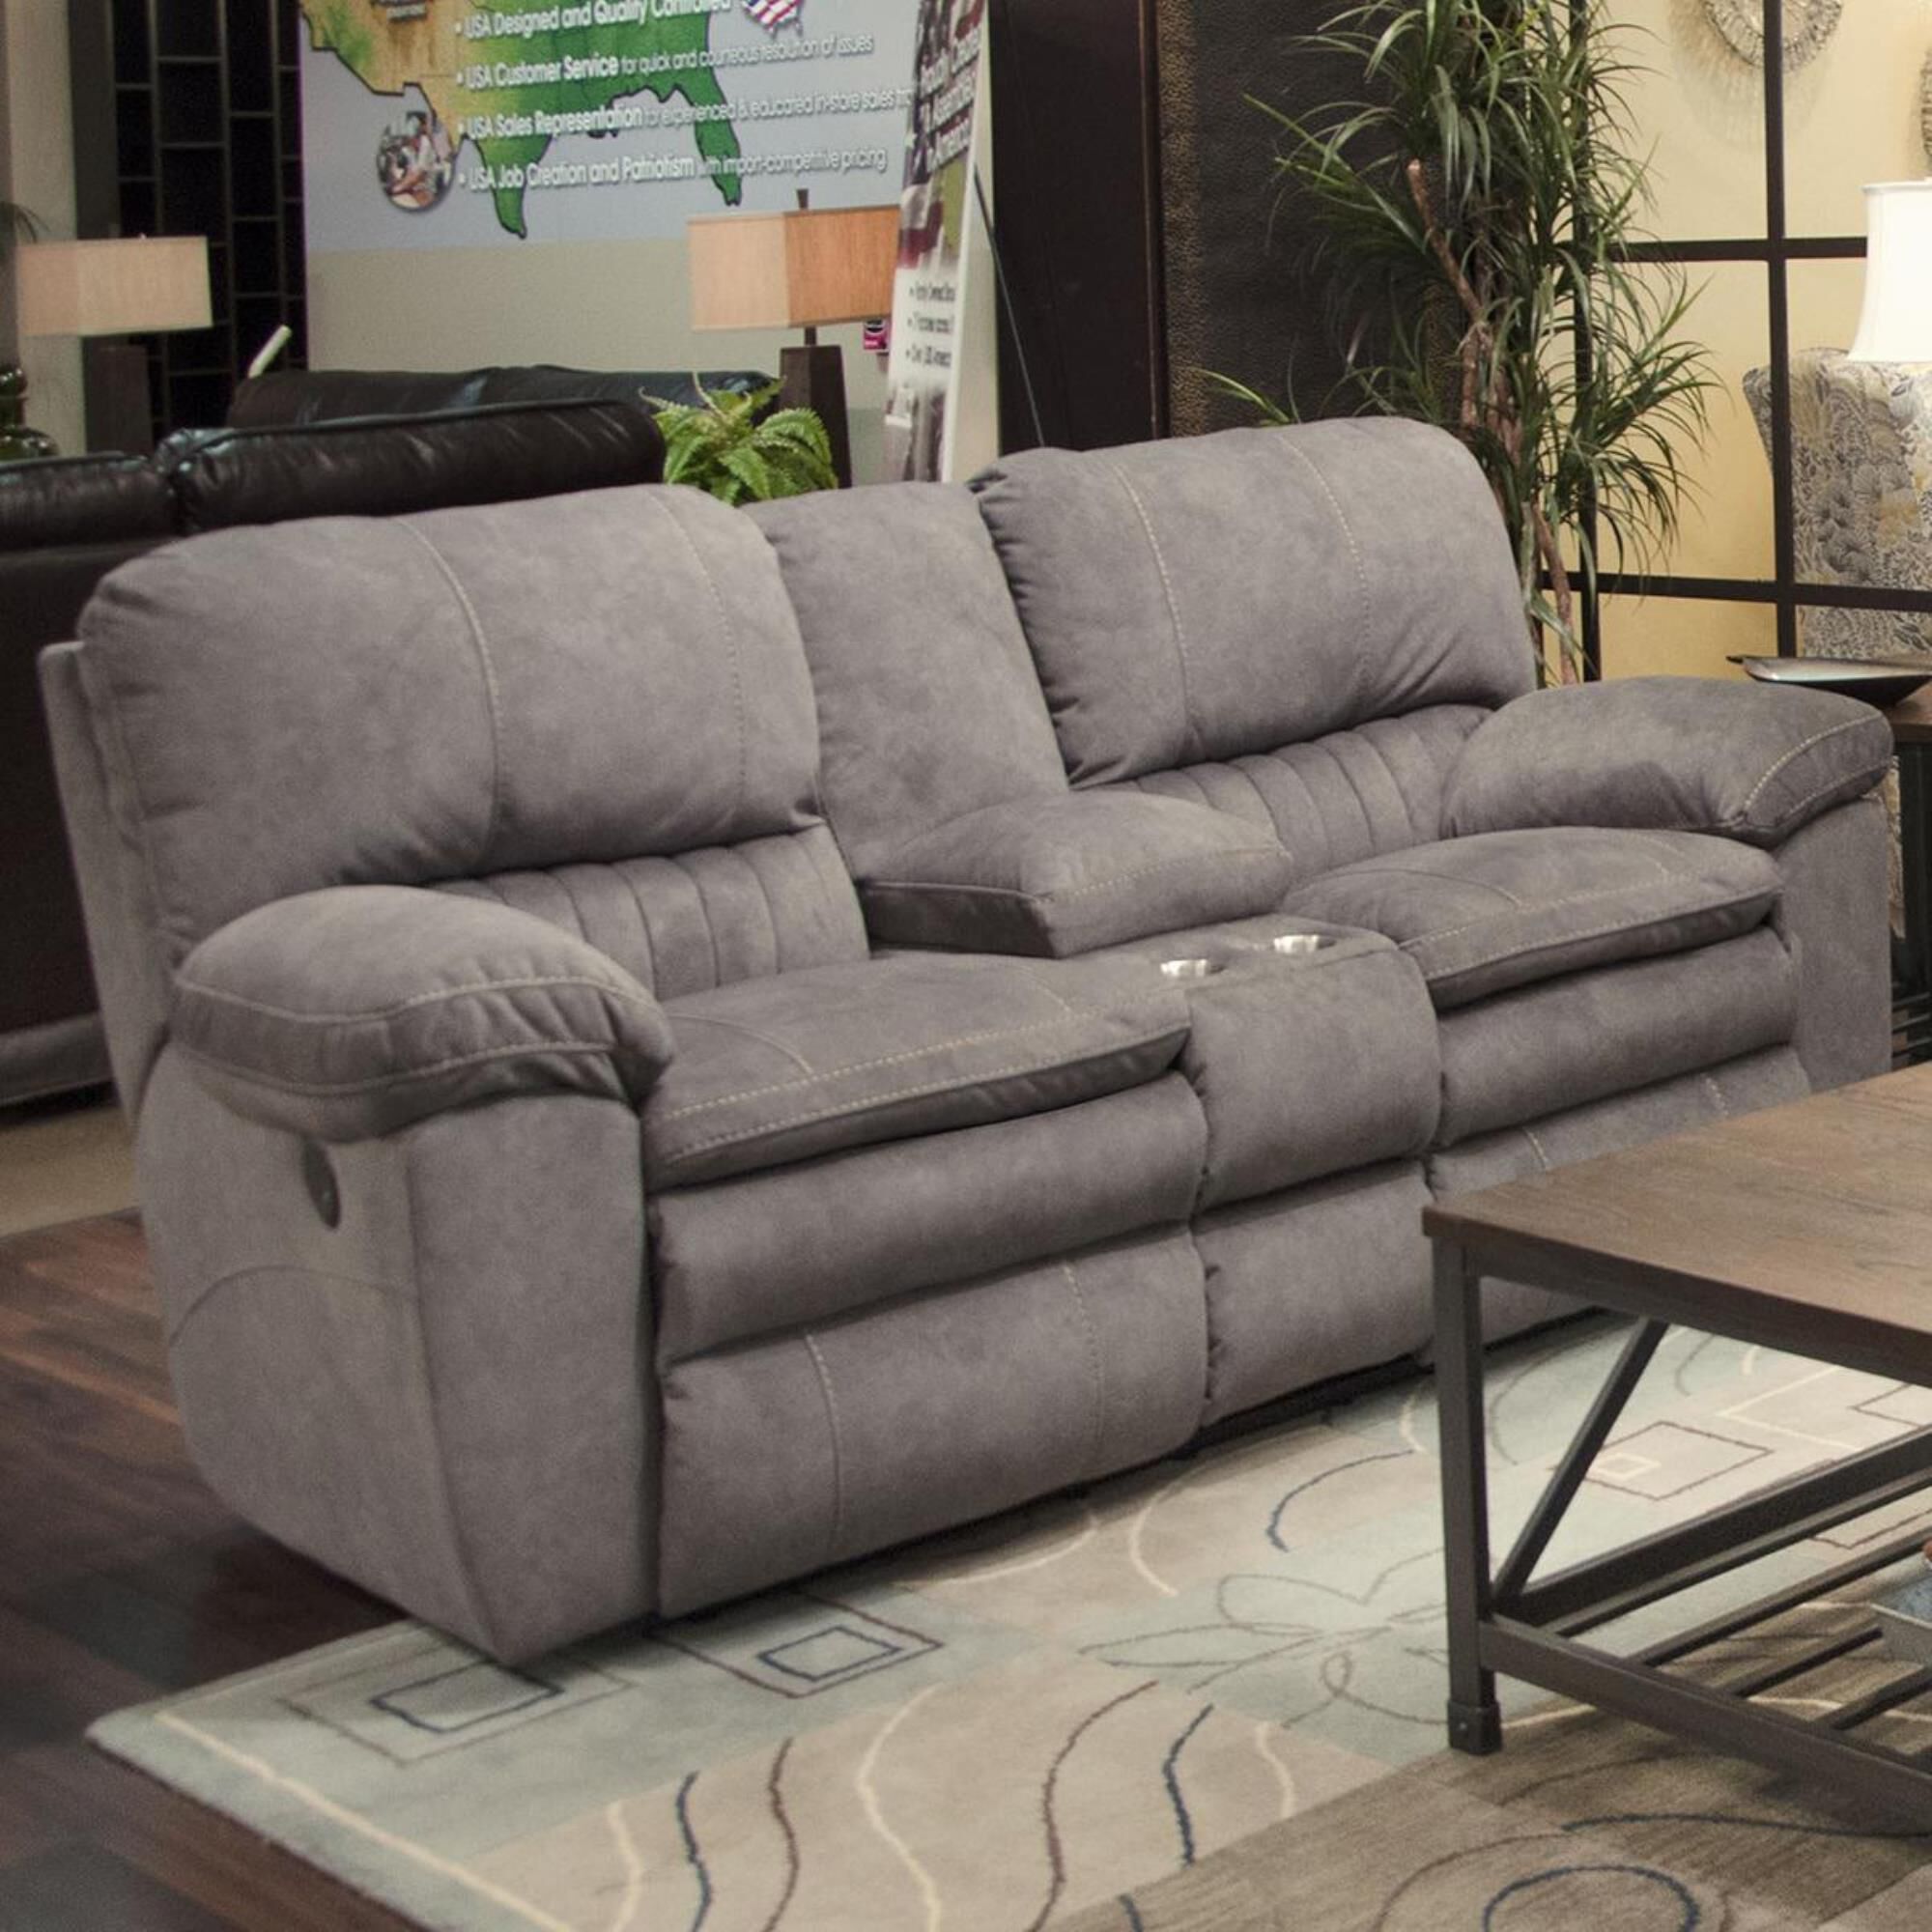 How to make purchase of the small
reclining loveseat online